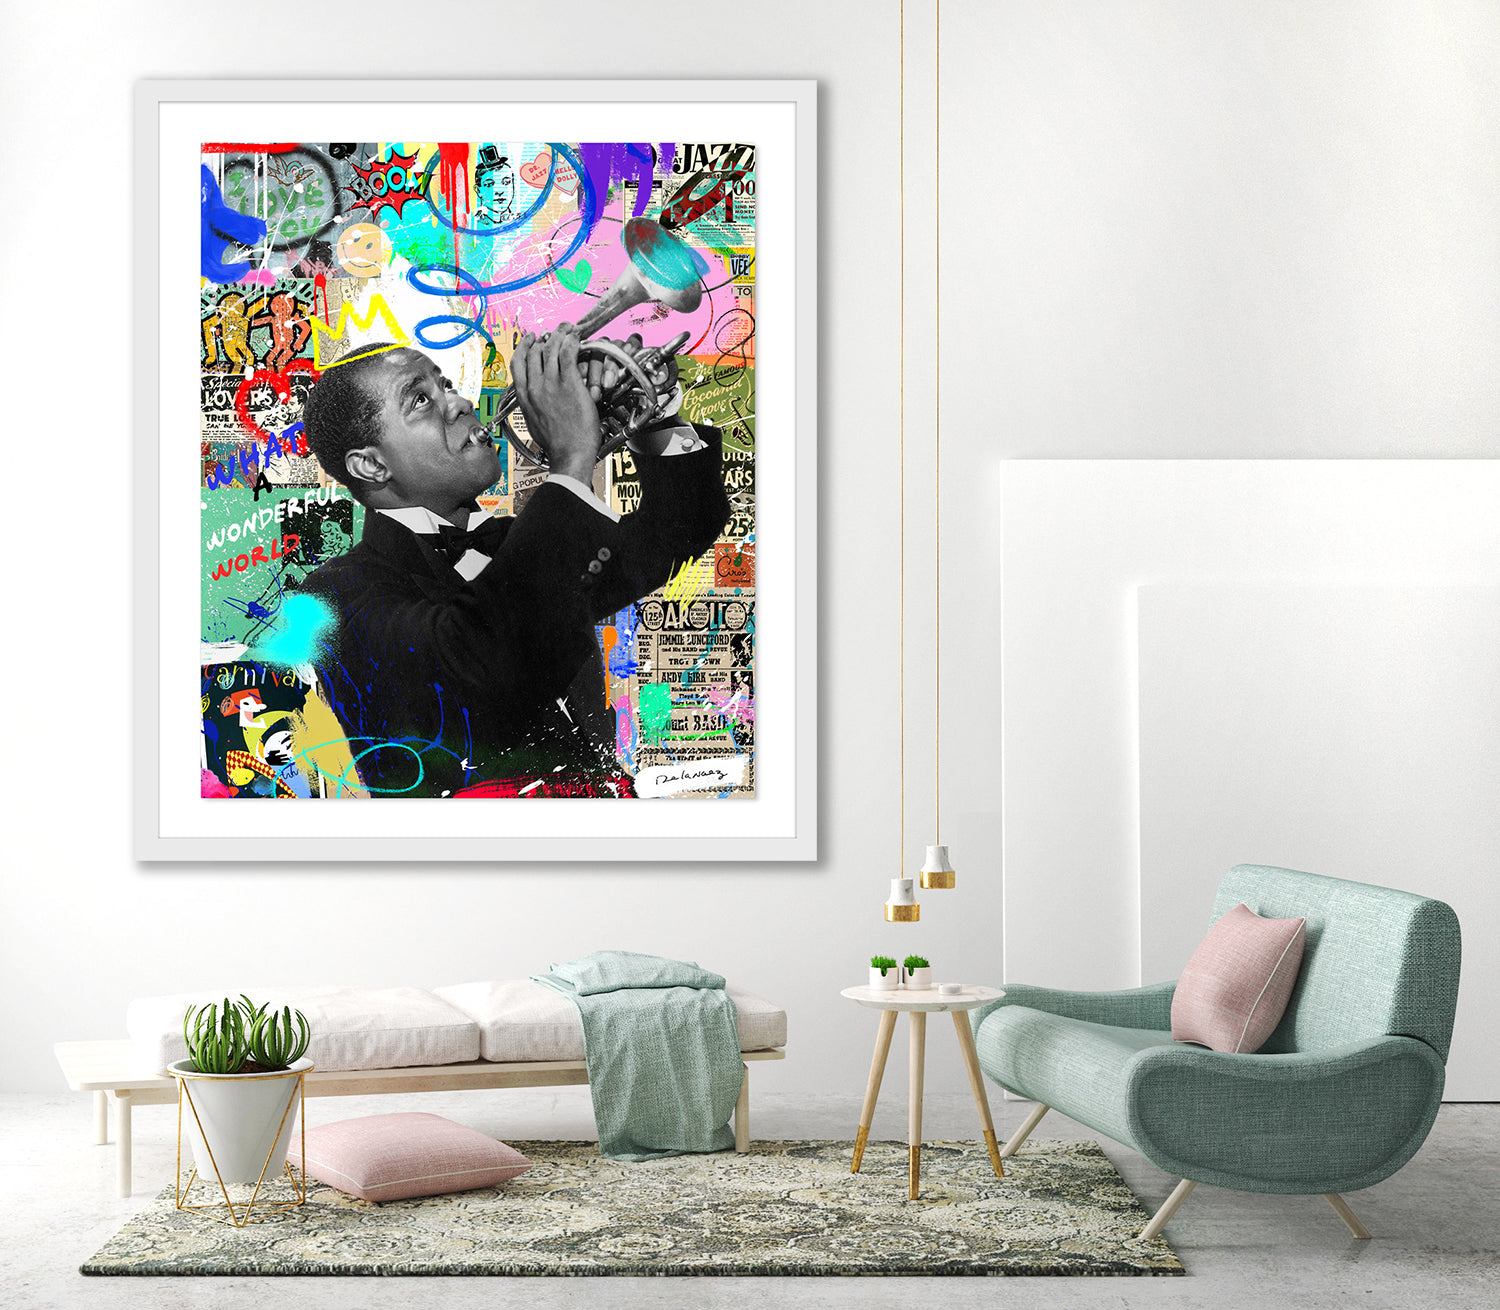 king of pop art nelson de la nuez satchmo framed mixed media louis armstrong satch pops jazz music trumpet trumpeter what a wonderful world